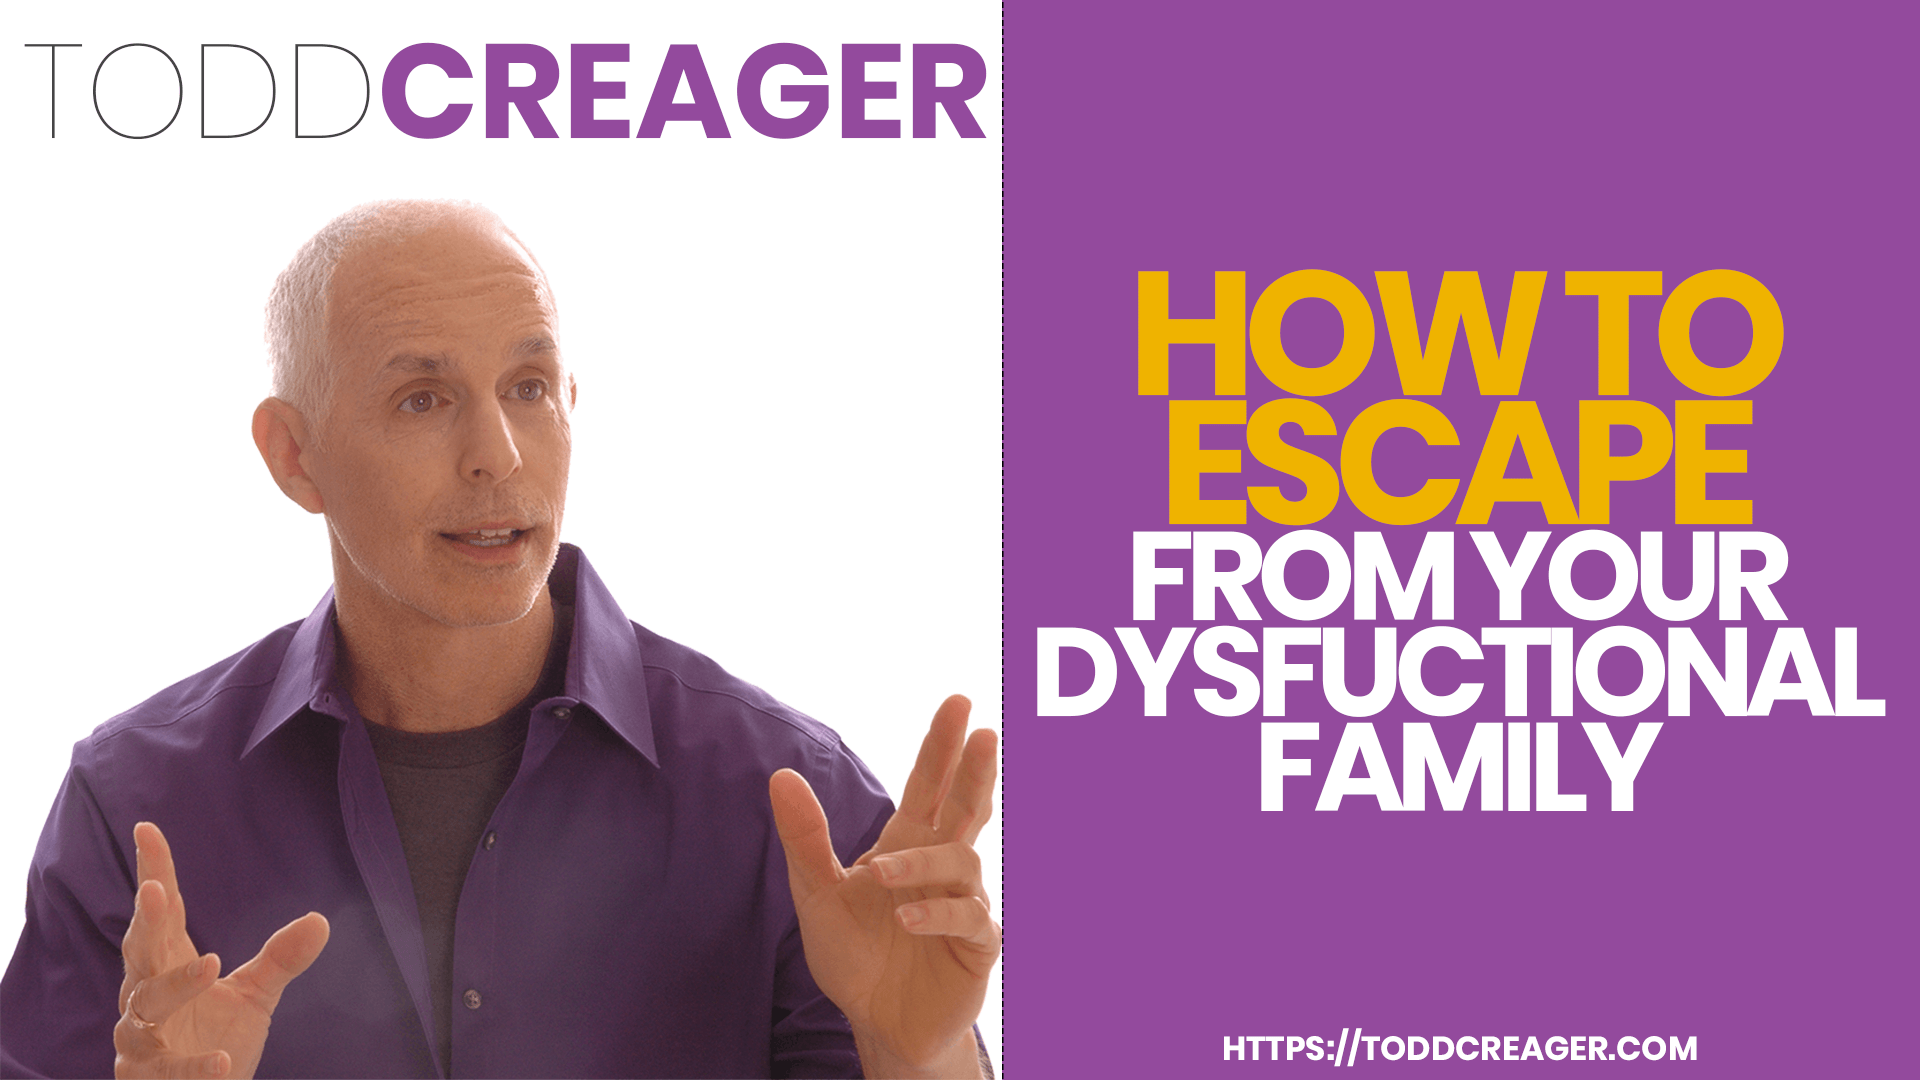 How To Escape From Your Dysfunctional Family